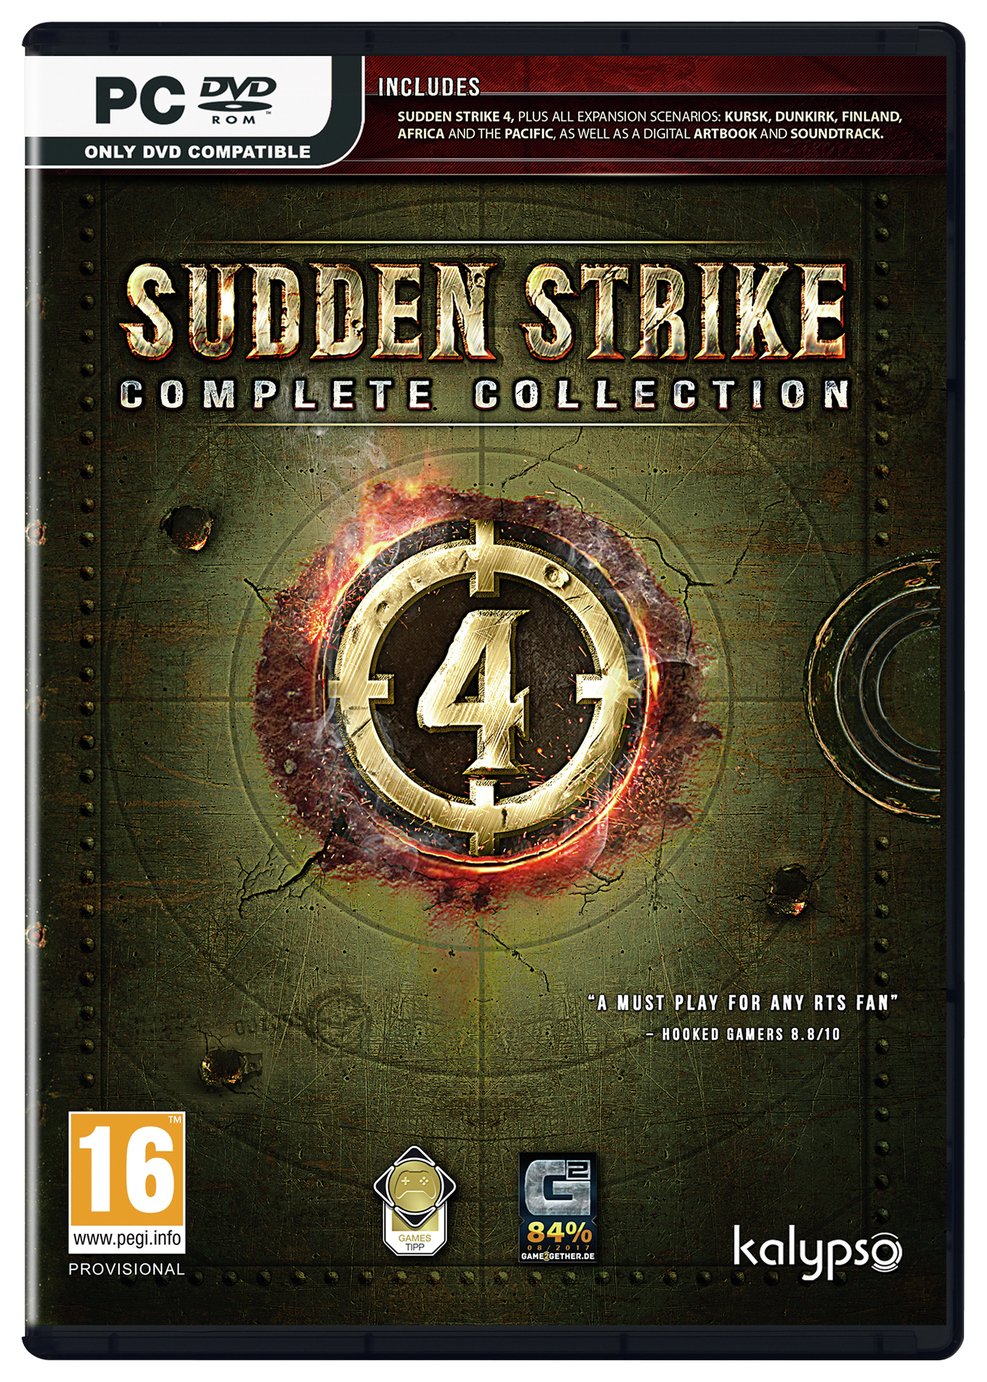 Sudden Strike 4: Complete Collection PC Game